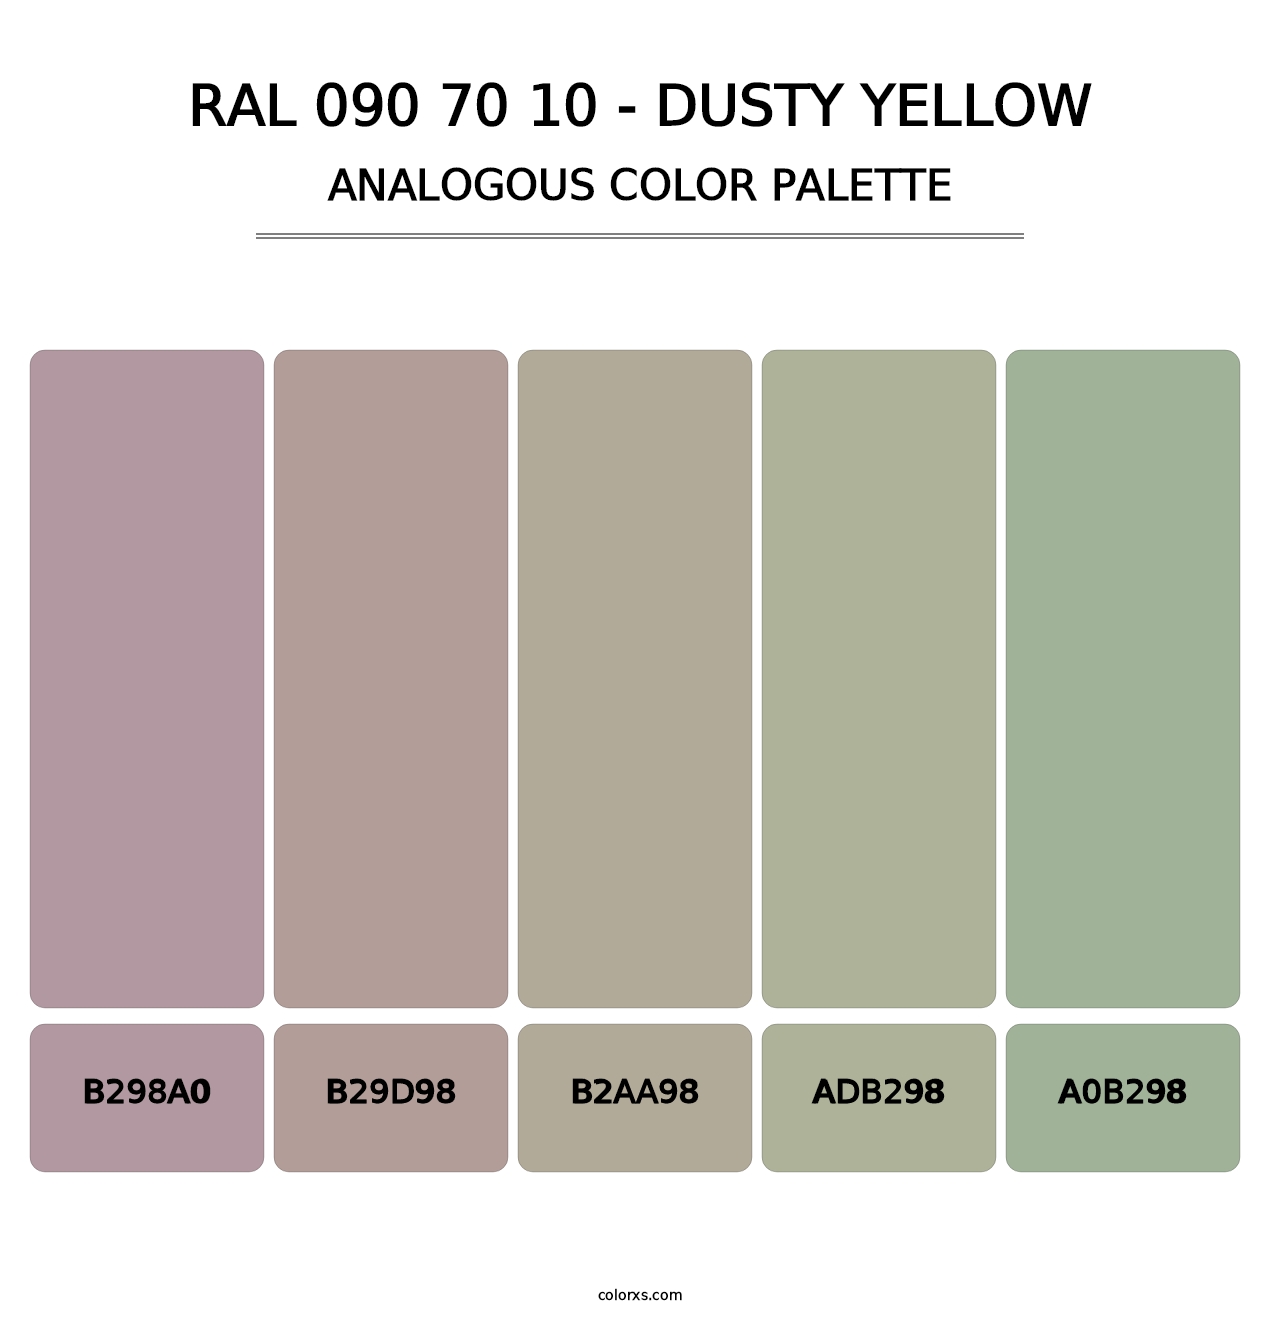 RAL 090 70 10 - Dusty Yellow - Analogous Color Palette